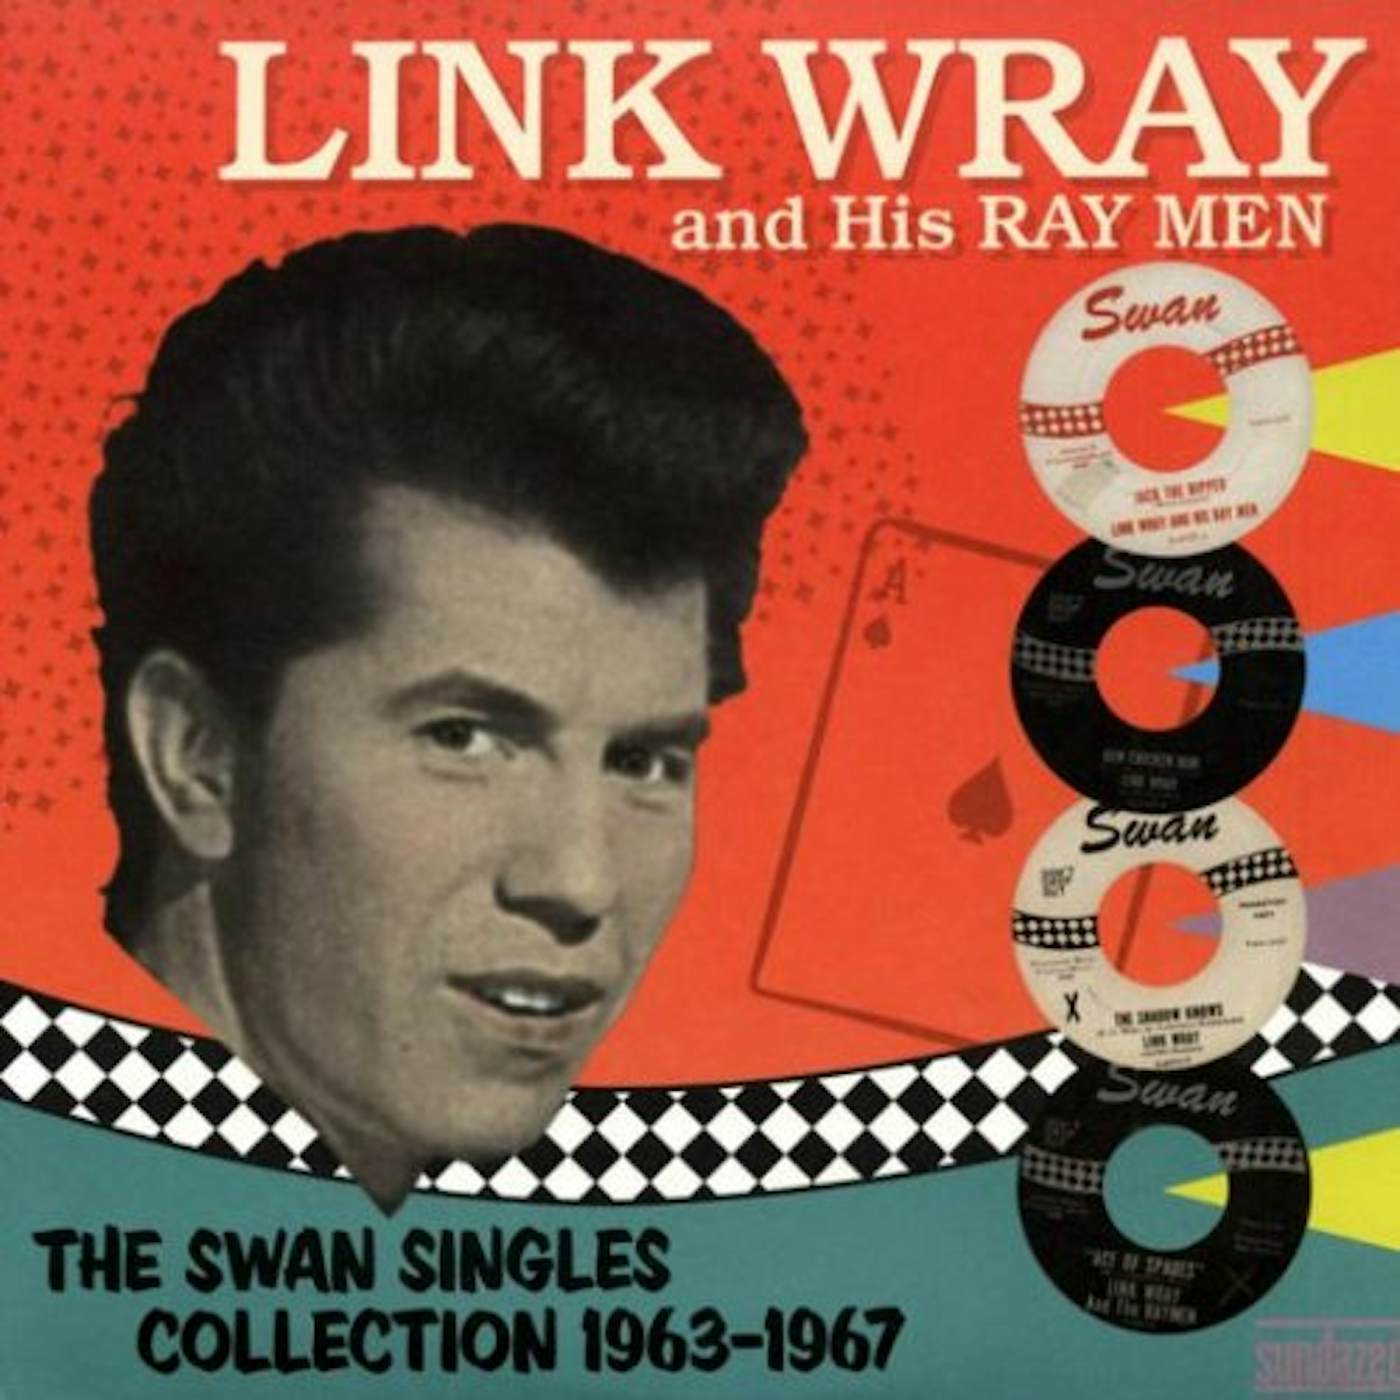 Link Wray SWAN SINGLES COLLECTION 1963-1967 Vinyl Record